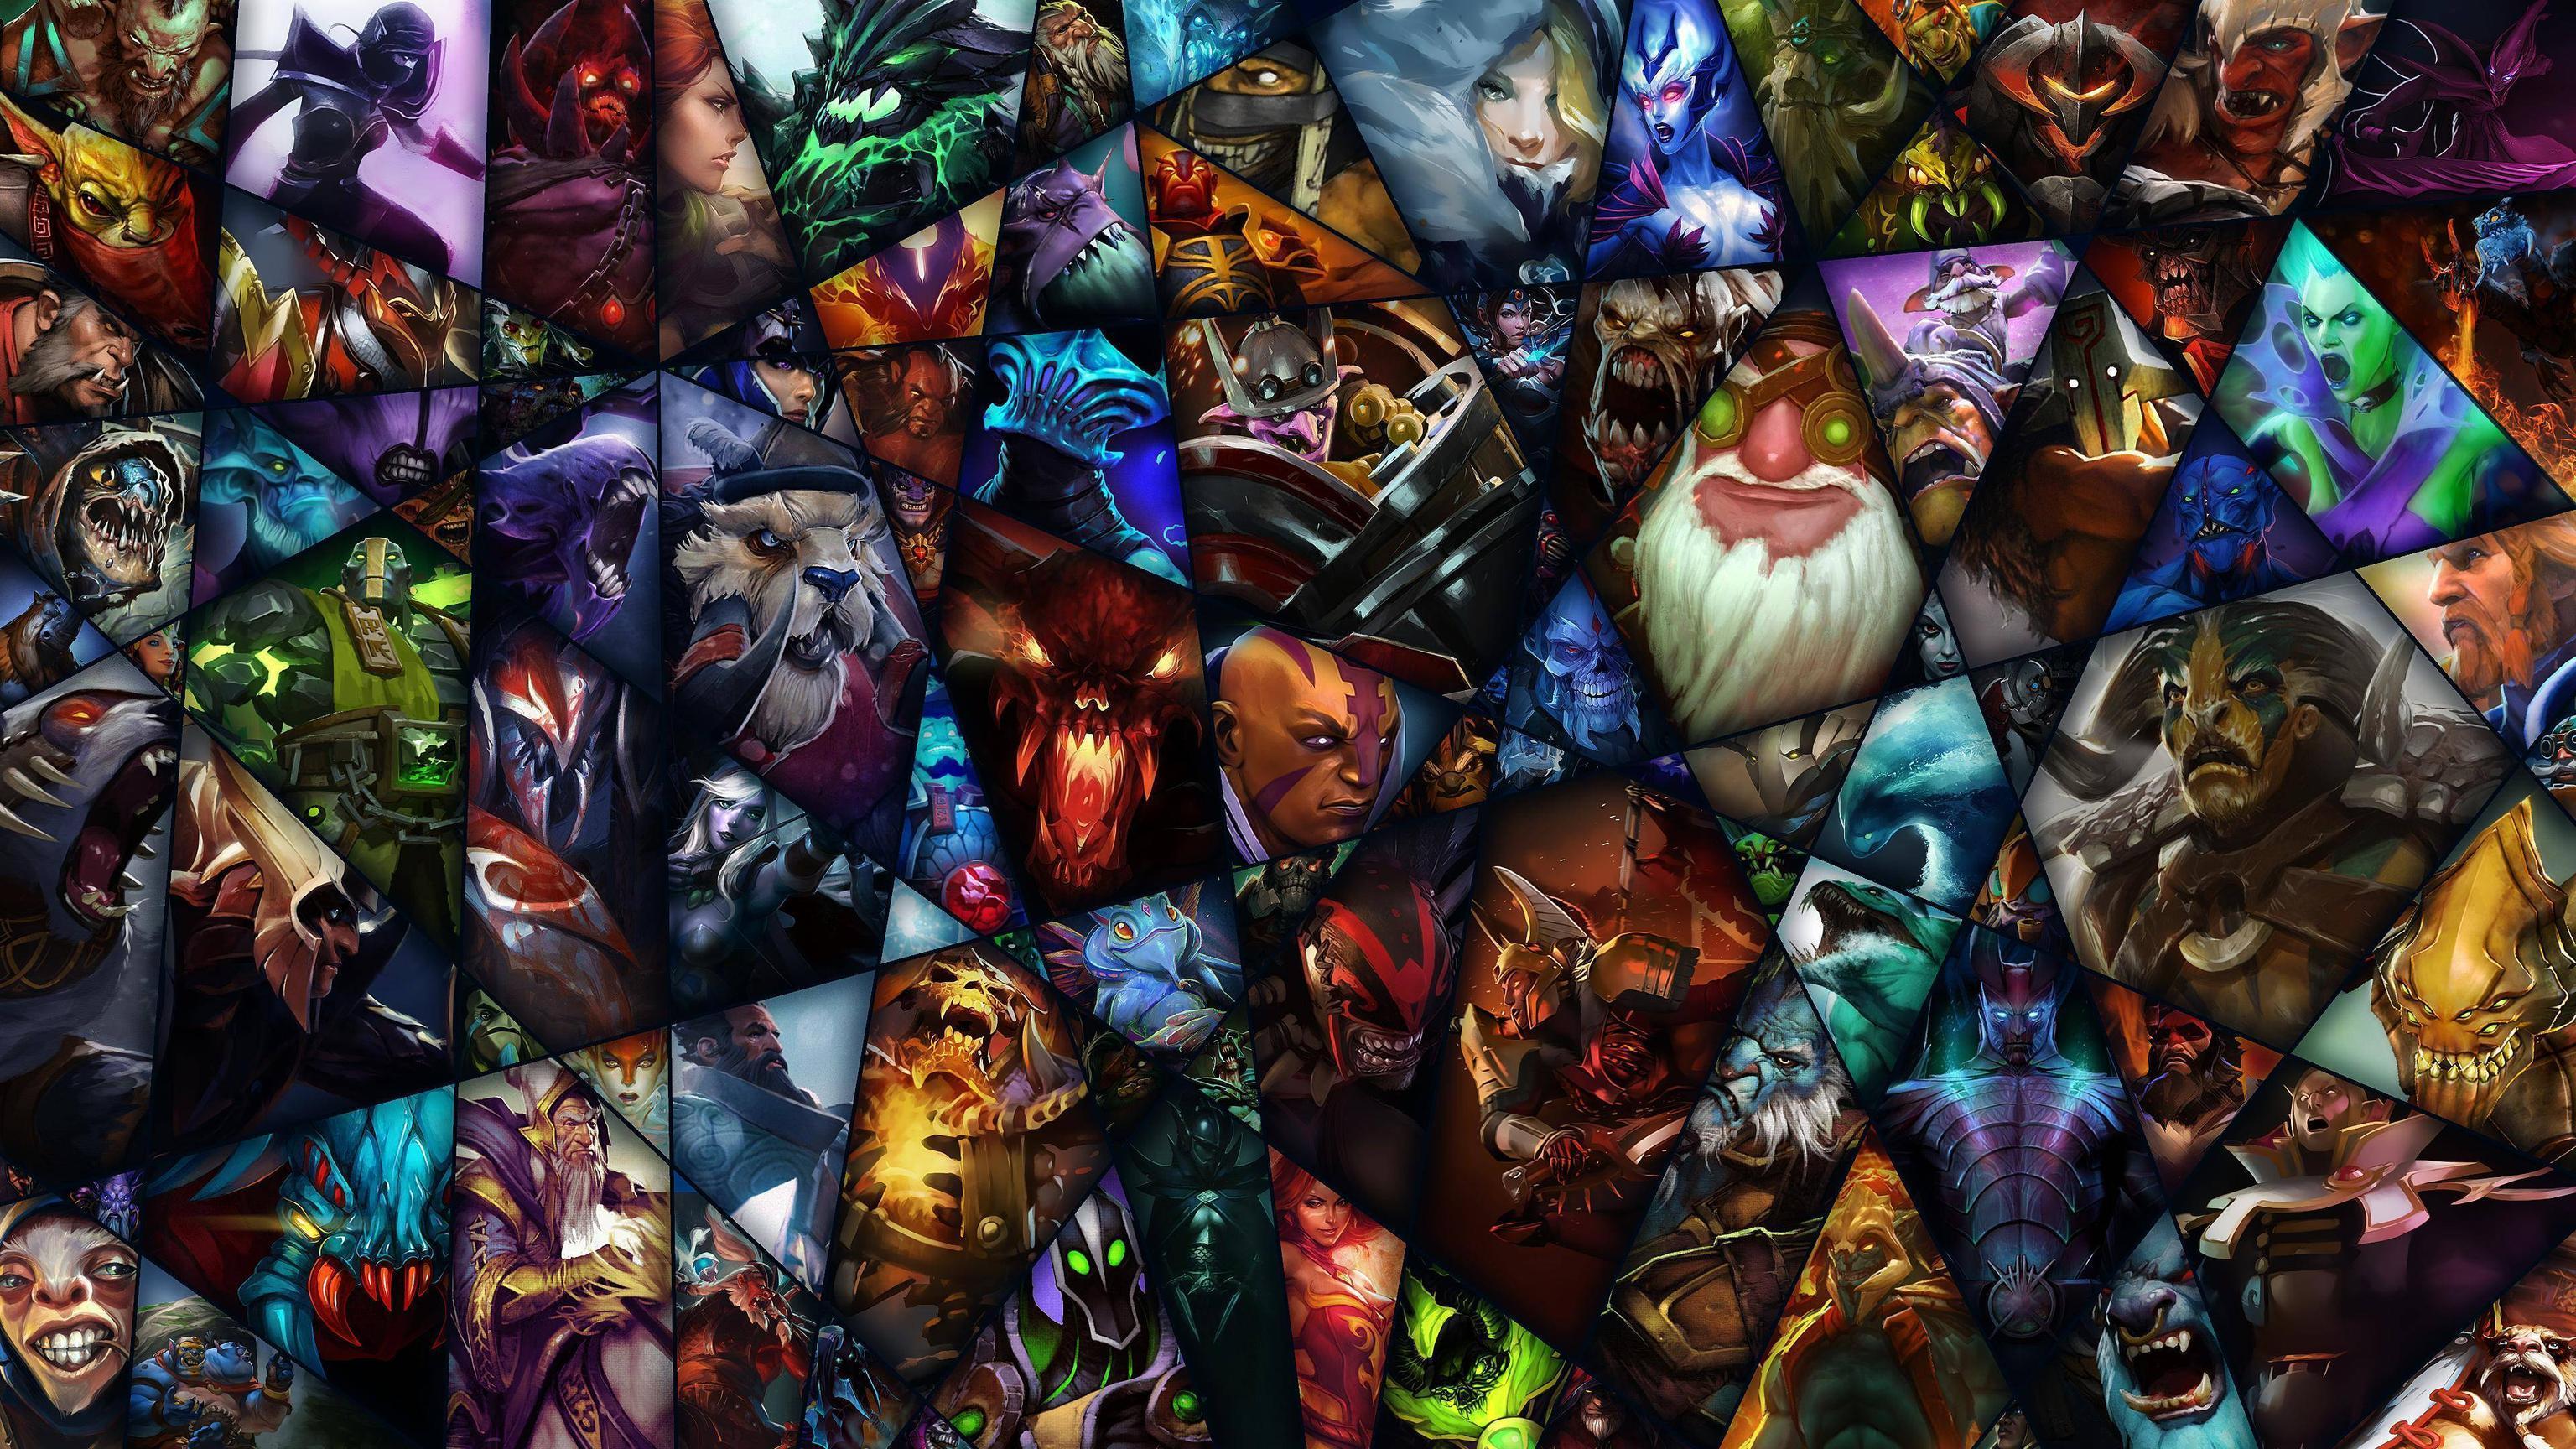 Dota 2 Background, incorporating the 107 heroes currently released